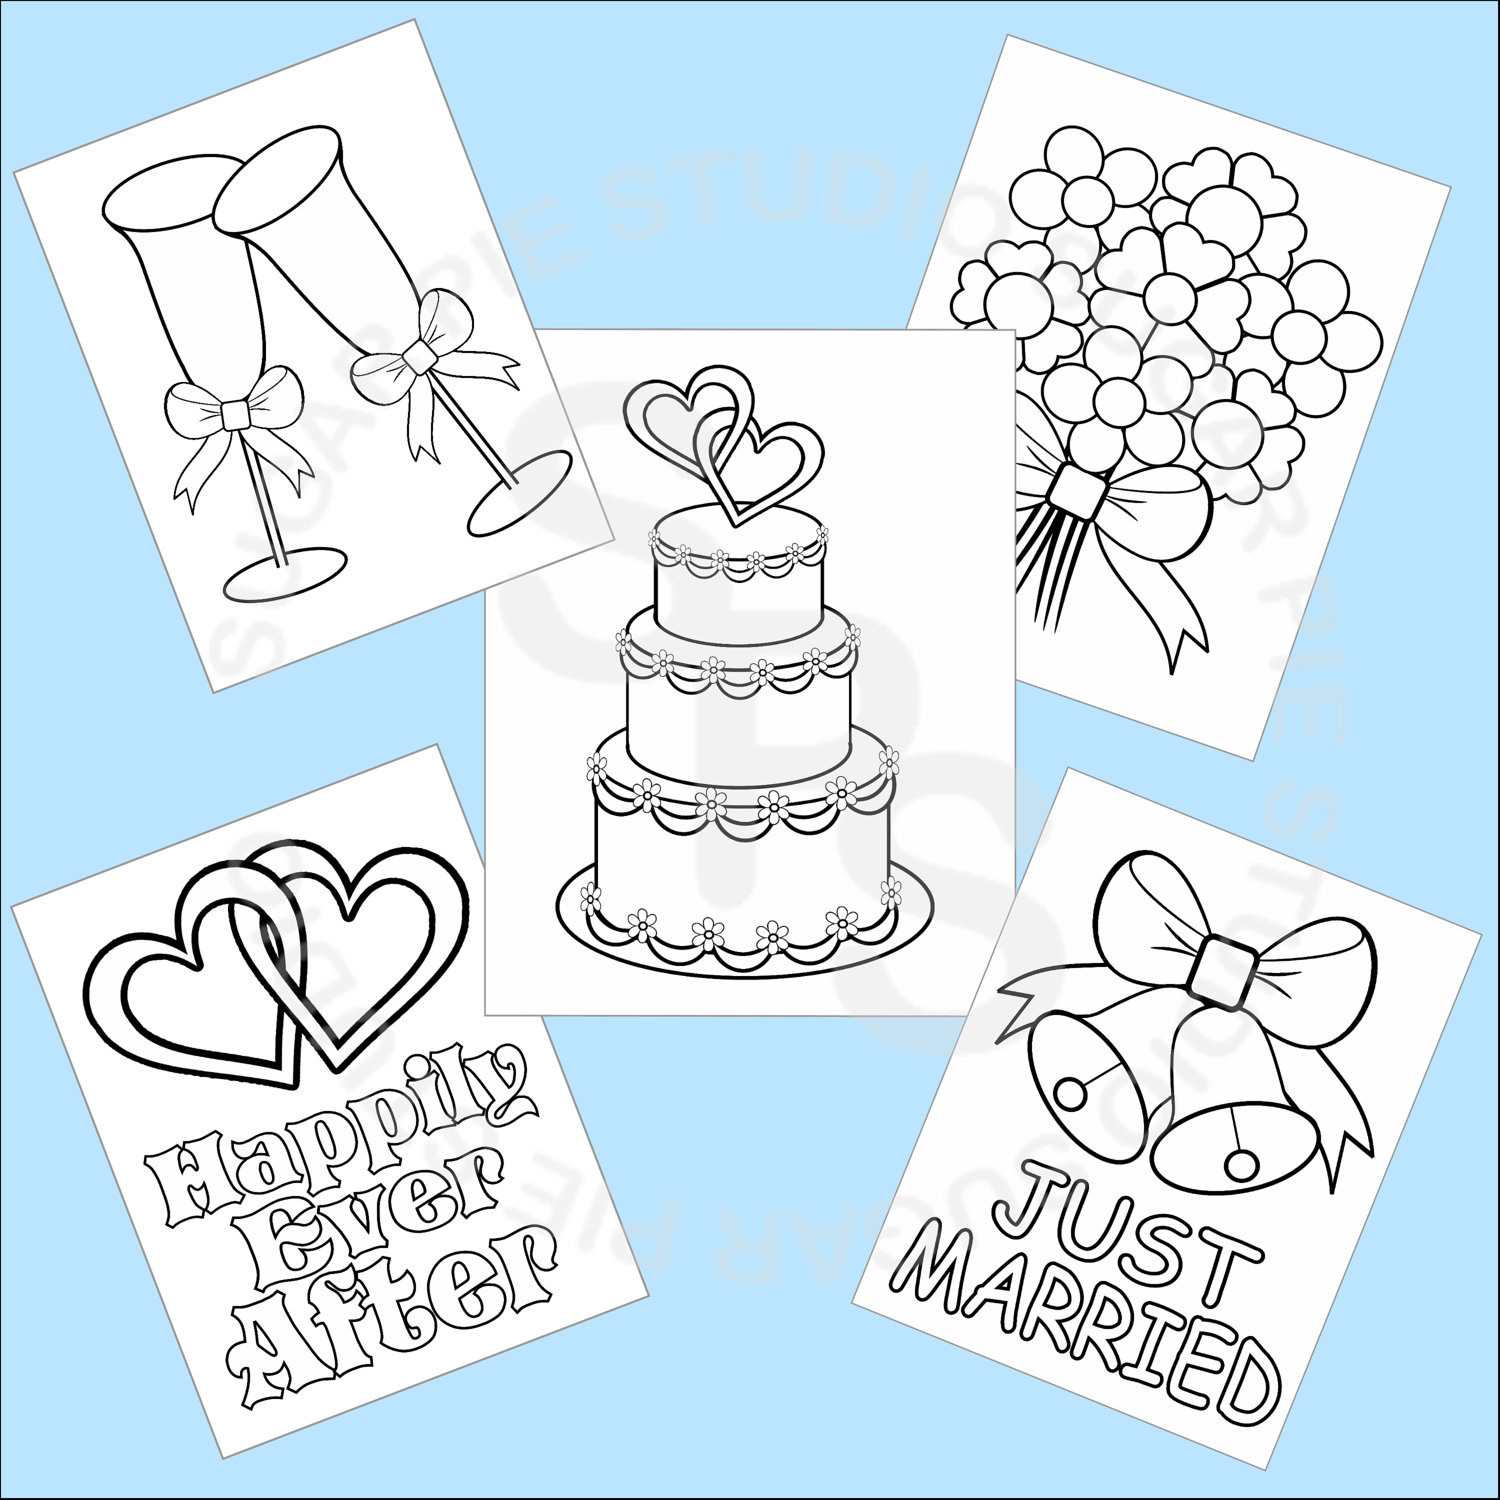 Free Printable Coloring Pages For Children
 5 Printable Wedding Favor Kids coloring pages by